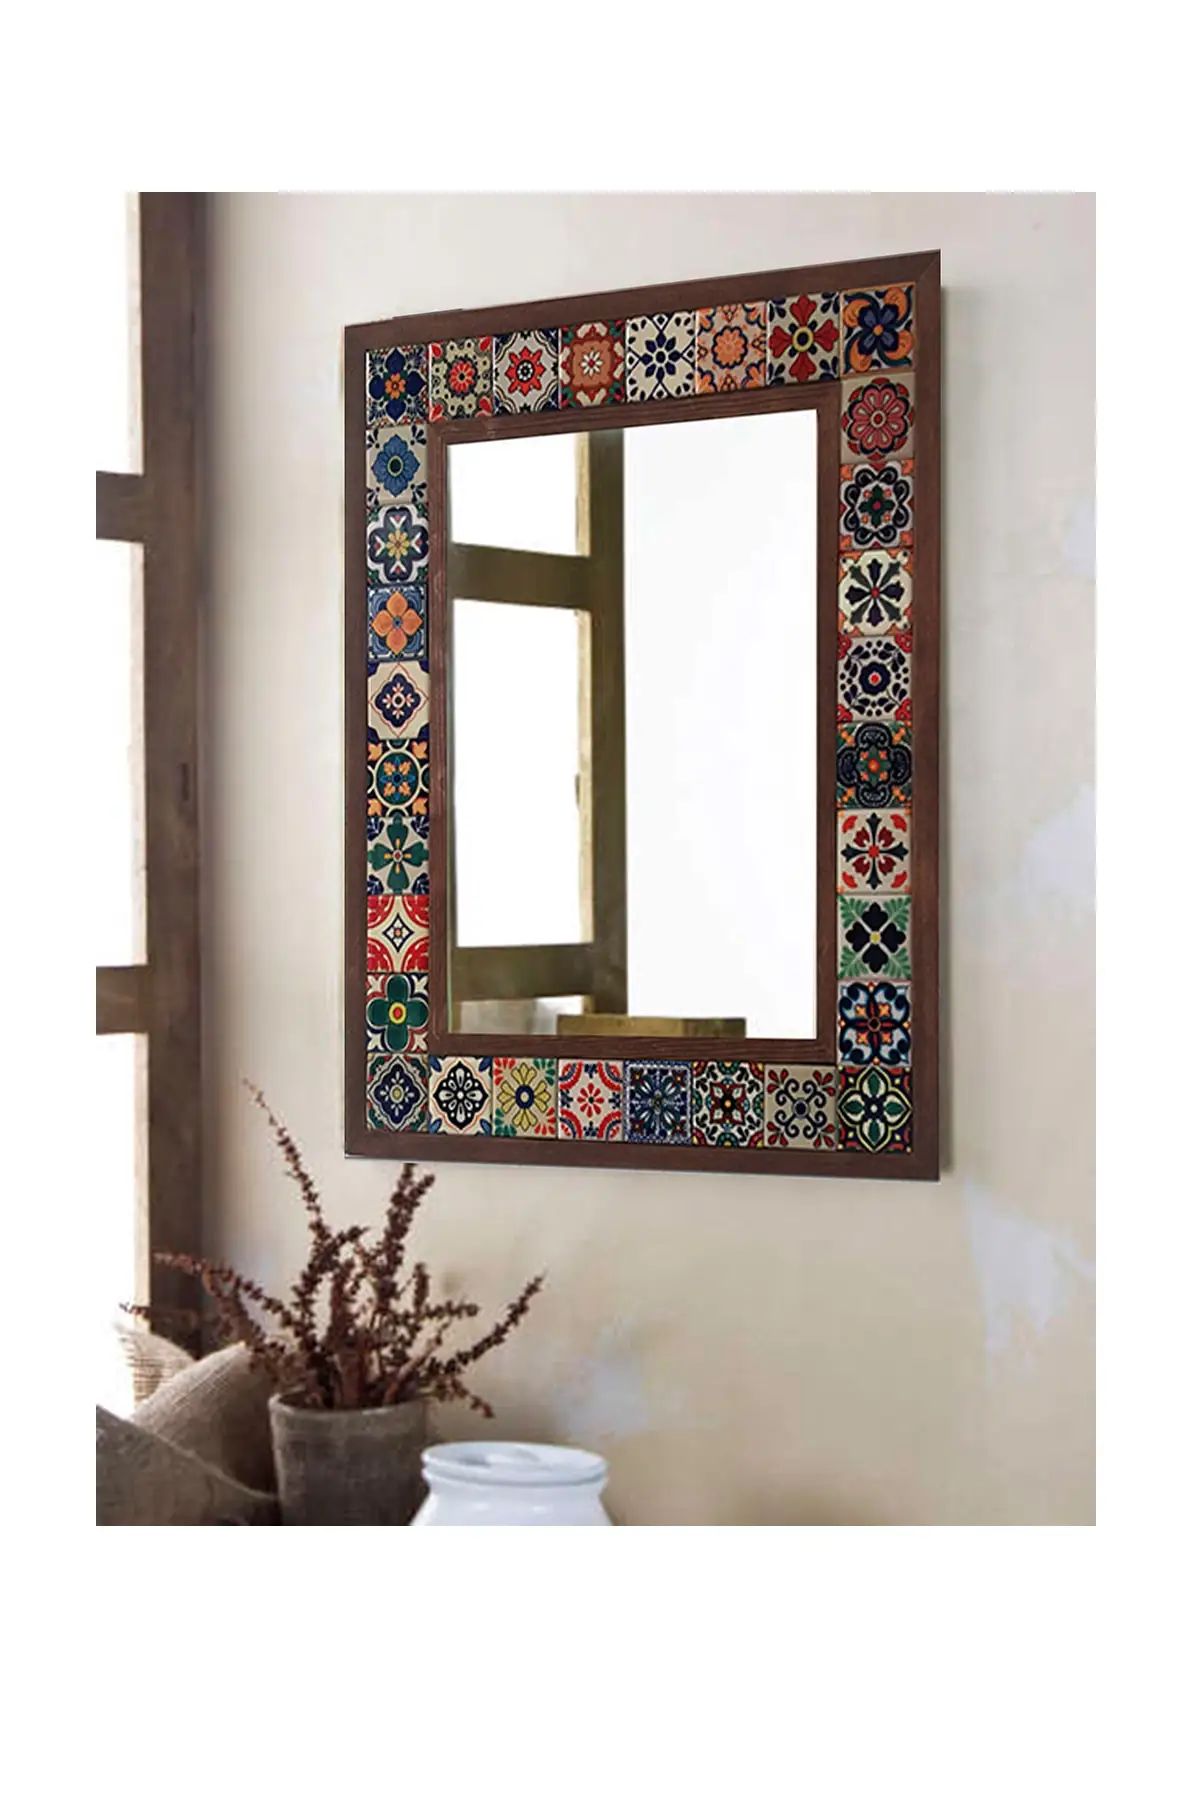 Patterned Ceramic Tile Wooden Mirror Decorative Wall Console 42x52 Cm Furniture Full Body Length Decor Bathroom Made In turkey